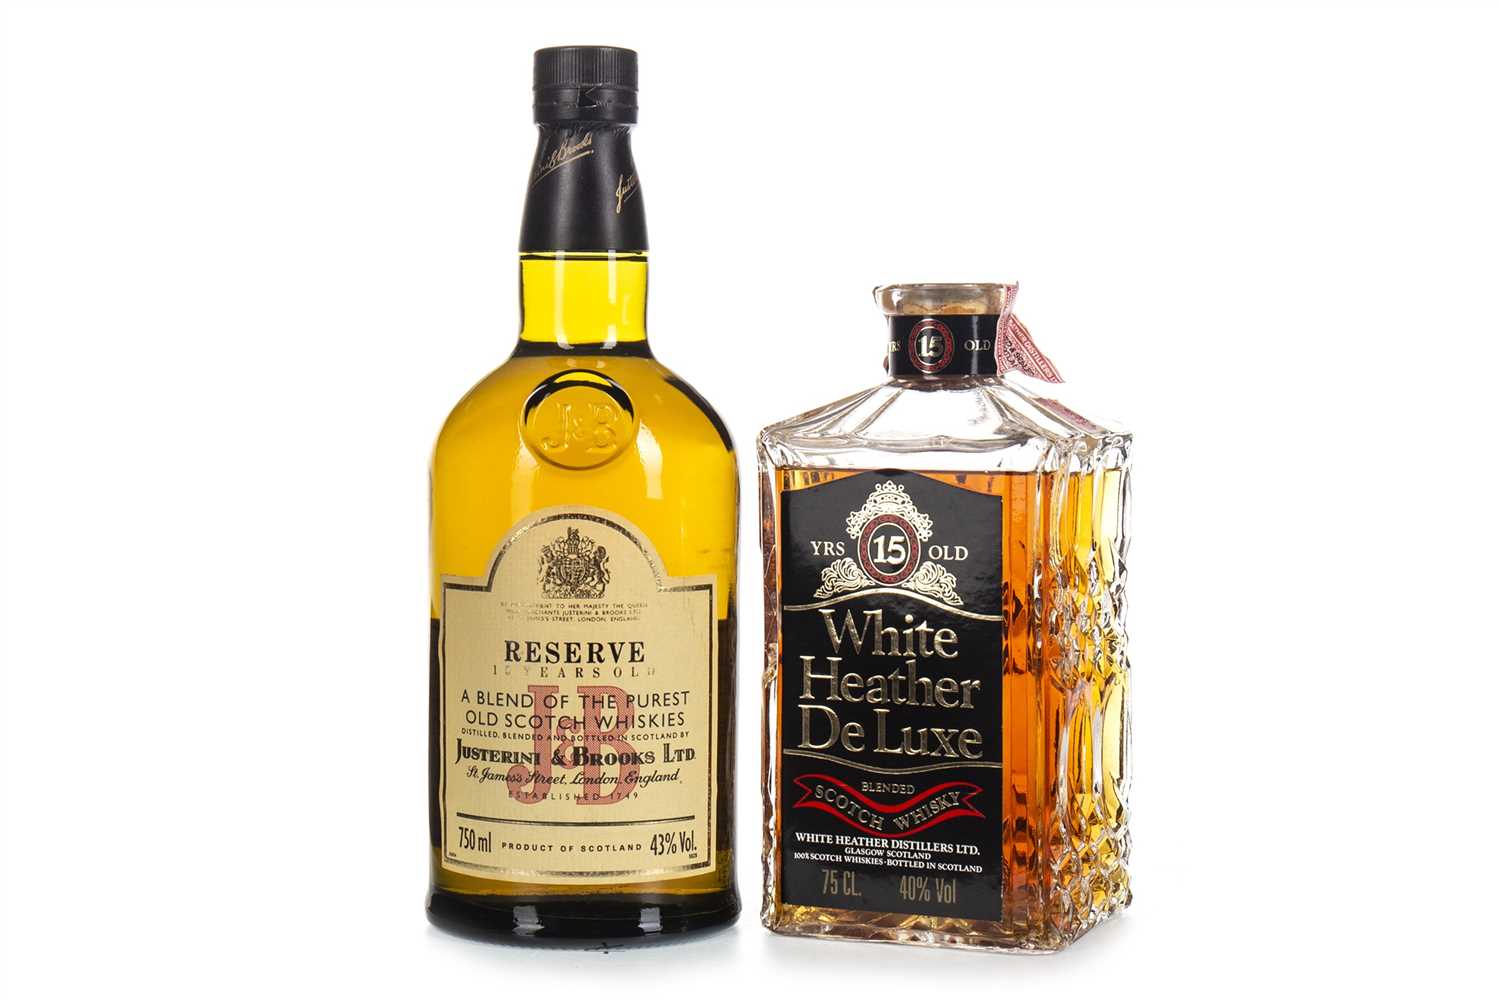 Lot 426 - J&B RESERVE 15 YEARS OLD AND WHITE HEATHER 15 YEARS OLD